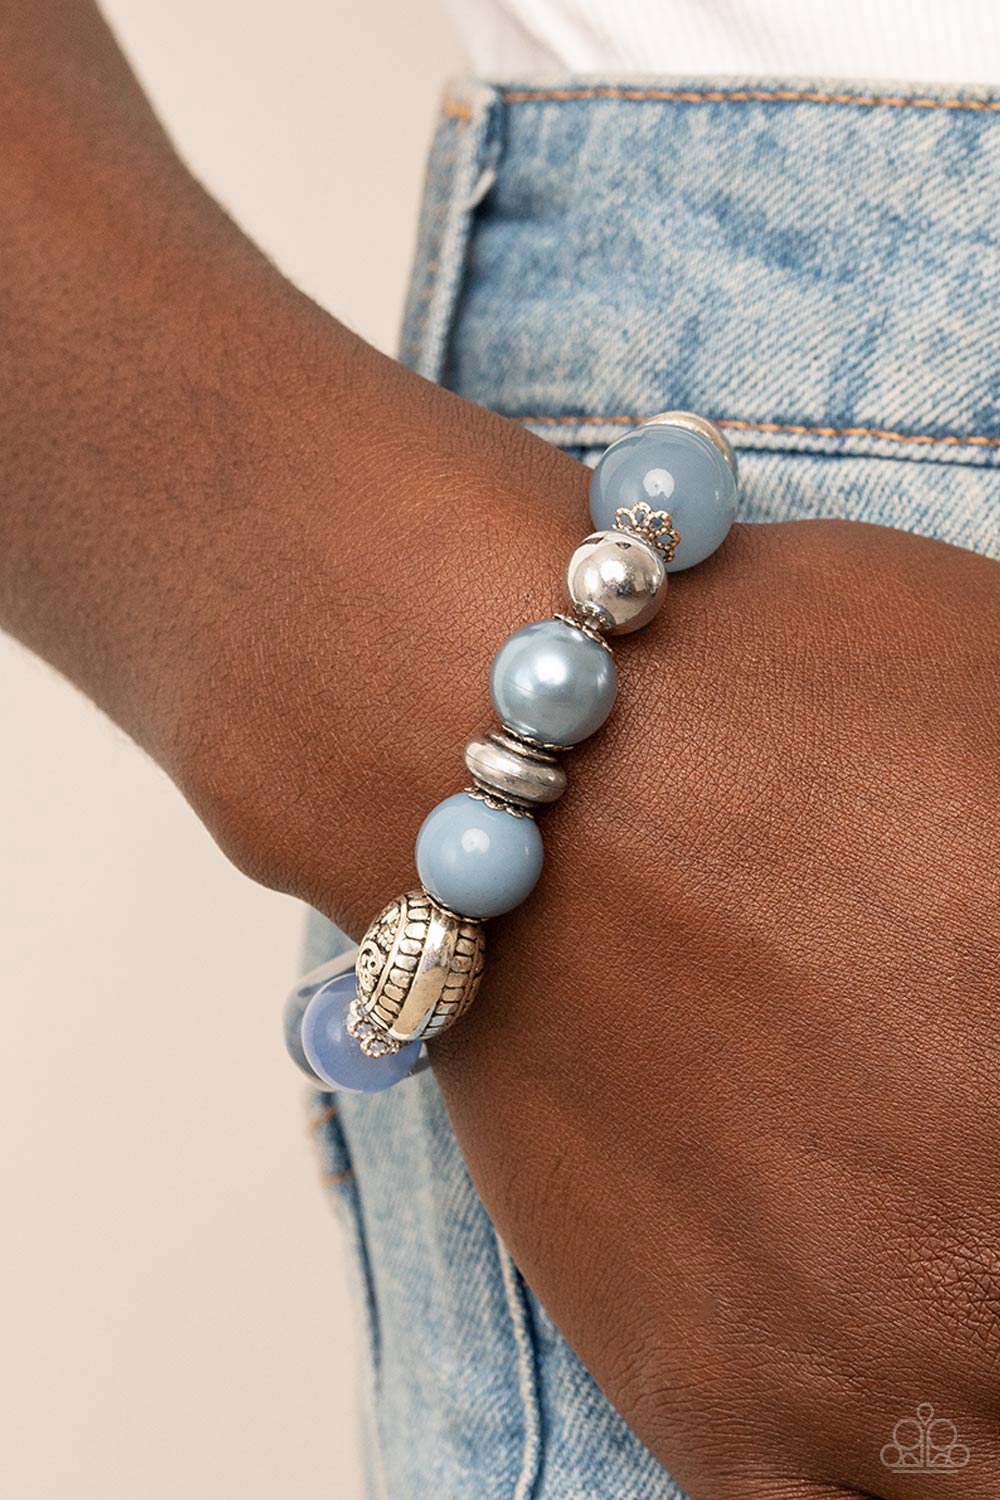 Tonal Takeover - Blue Pearly - Opaque Bead and Silver Stretchy Bracelet - An enchanting assortment of silver beads and white rhinestone encrusted silver rings join an opaque, glassy, and pearly assortment of Spring Lake beads along a stretchy band around the wrist.